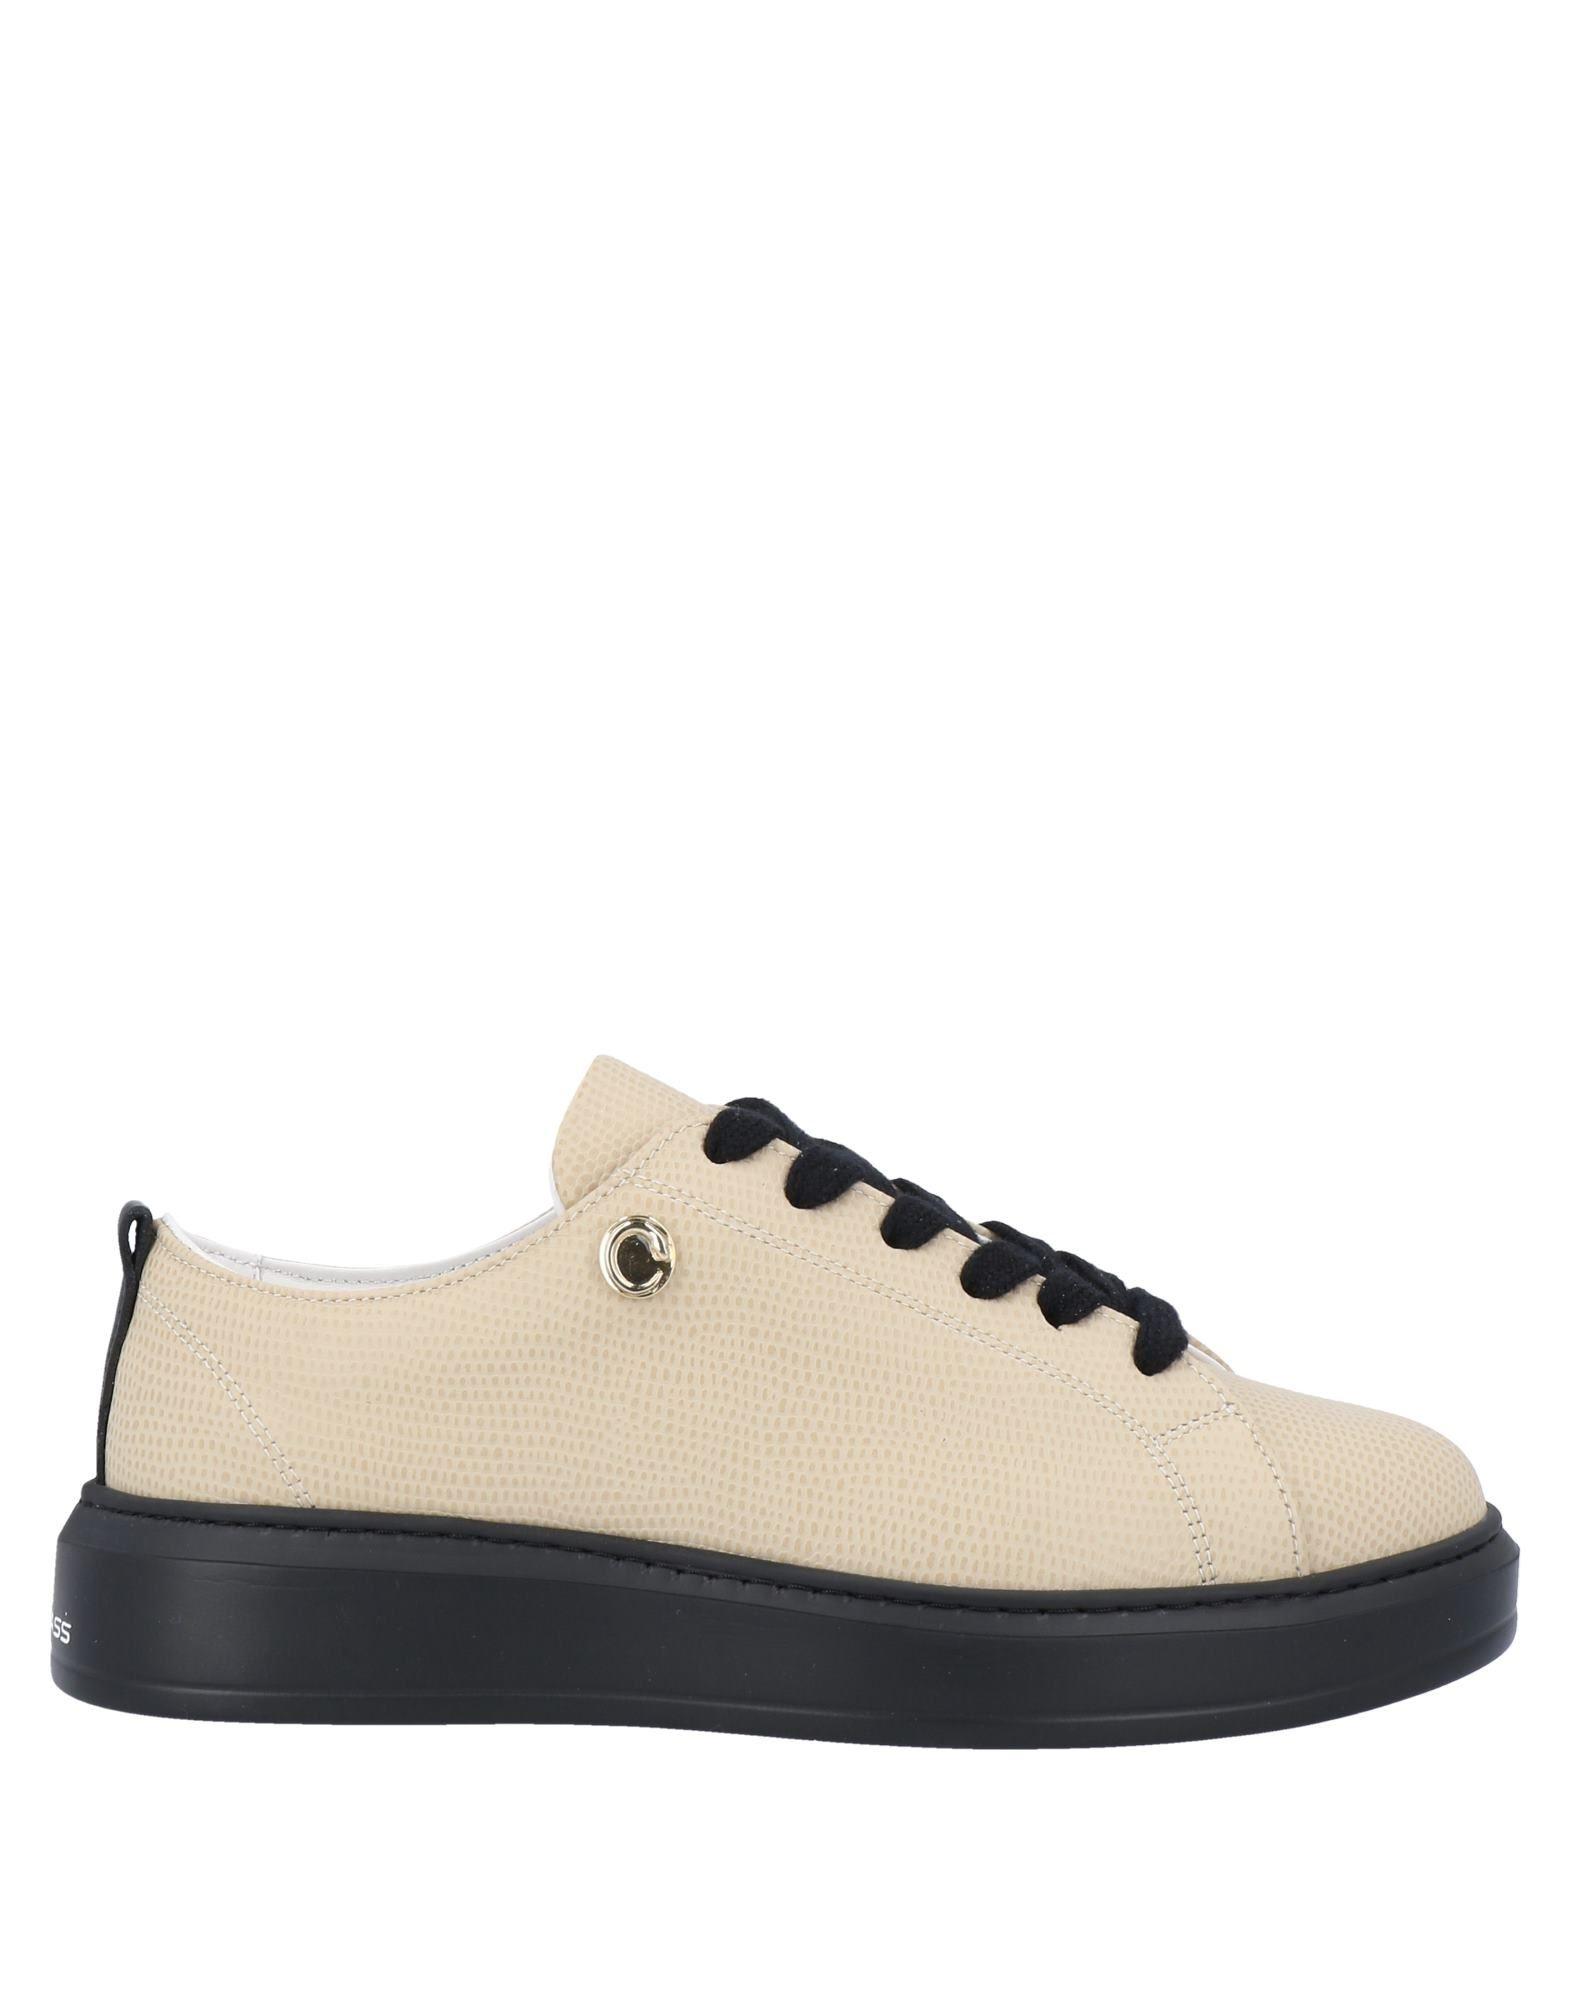 Class Roberto Cavalli Leather Trainers in Beige (Natural) - Lyst